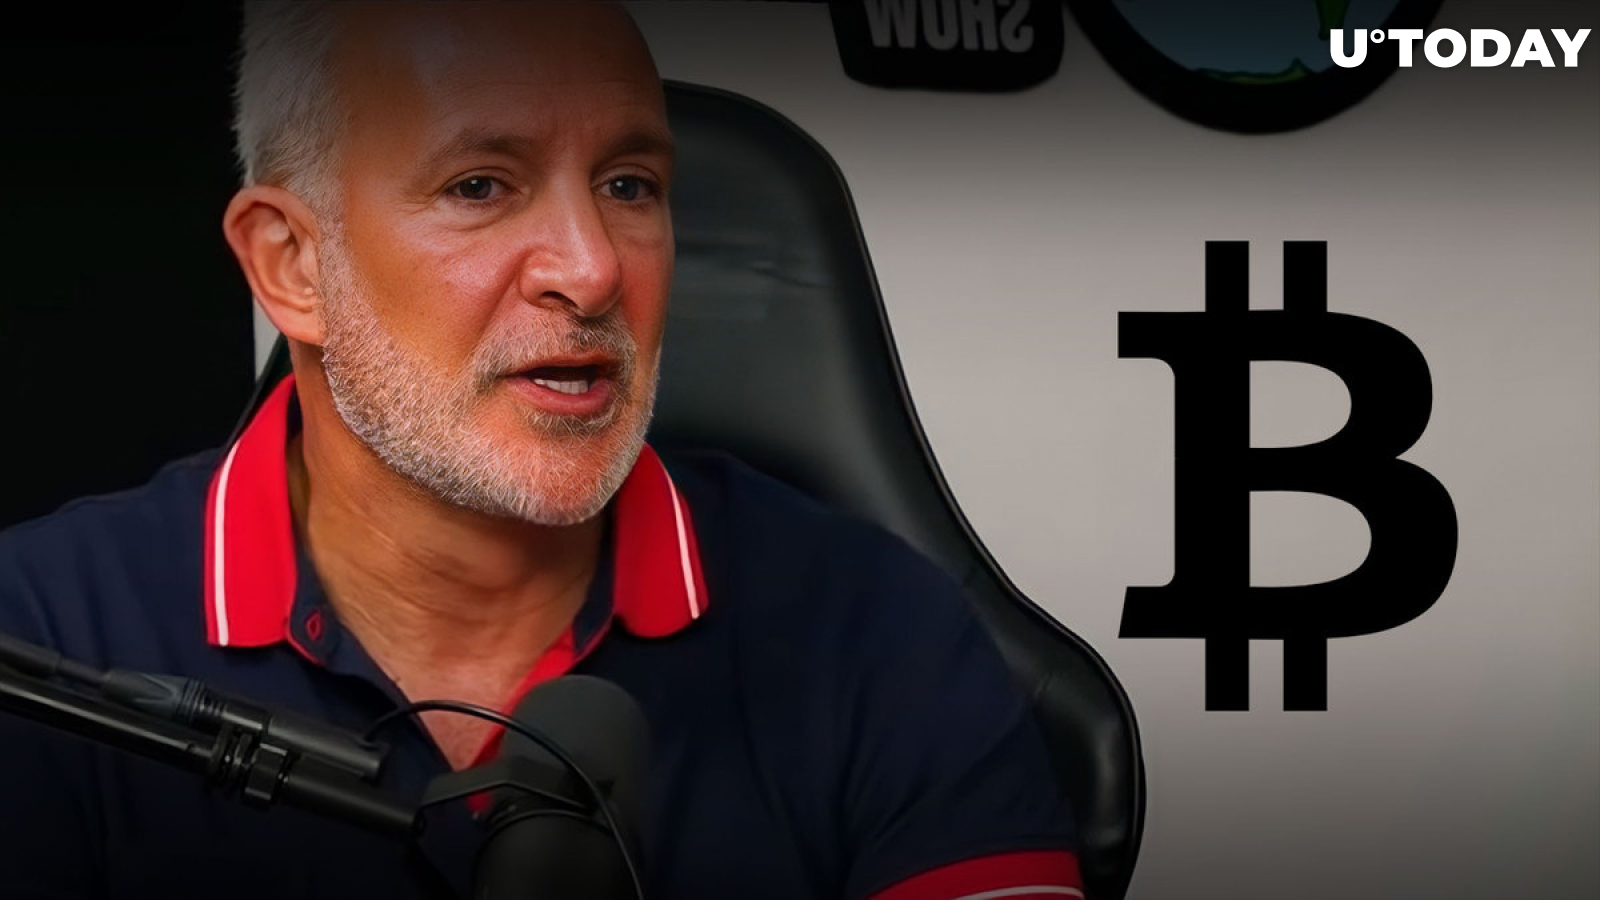 BTC Might Lead Next Leg Down, Peter Schiff Says to Bitcoin Hodlers